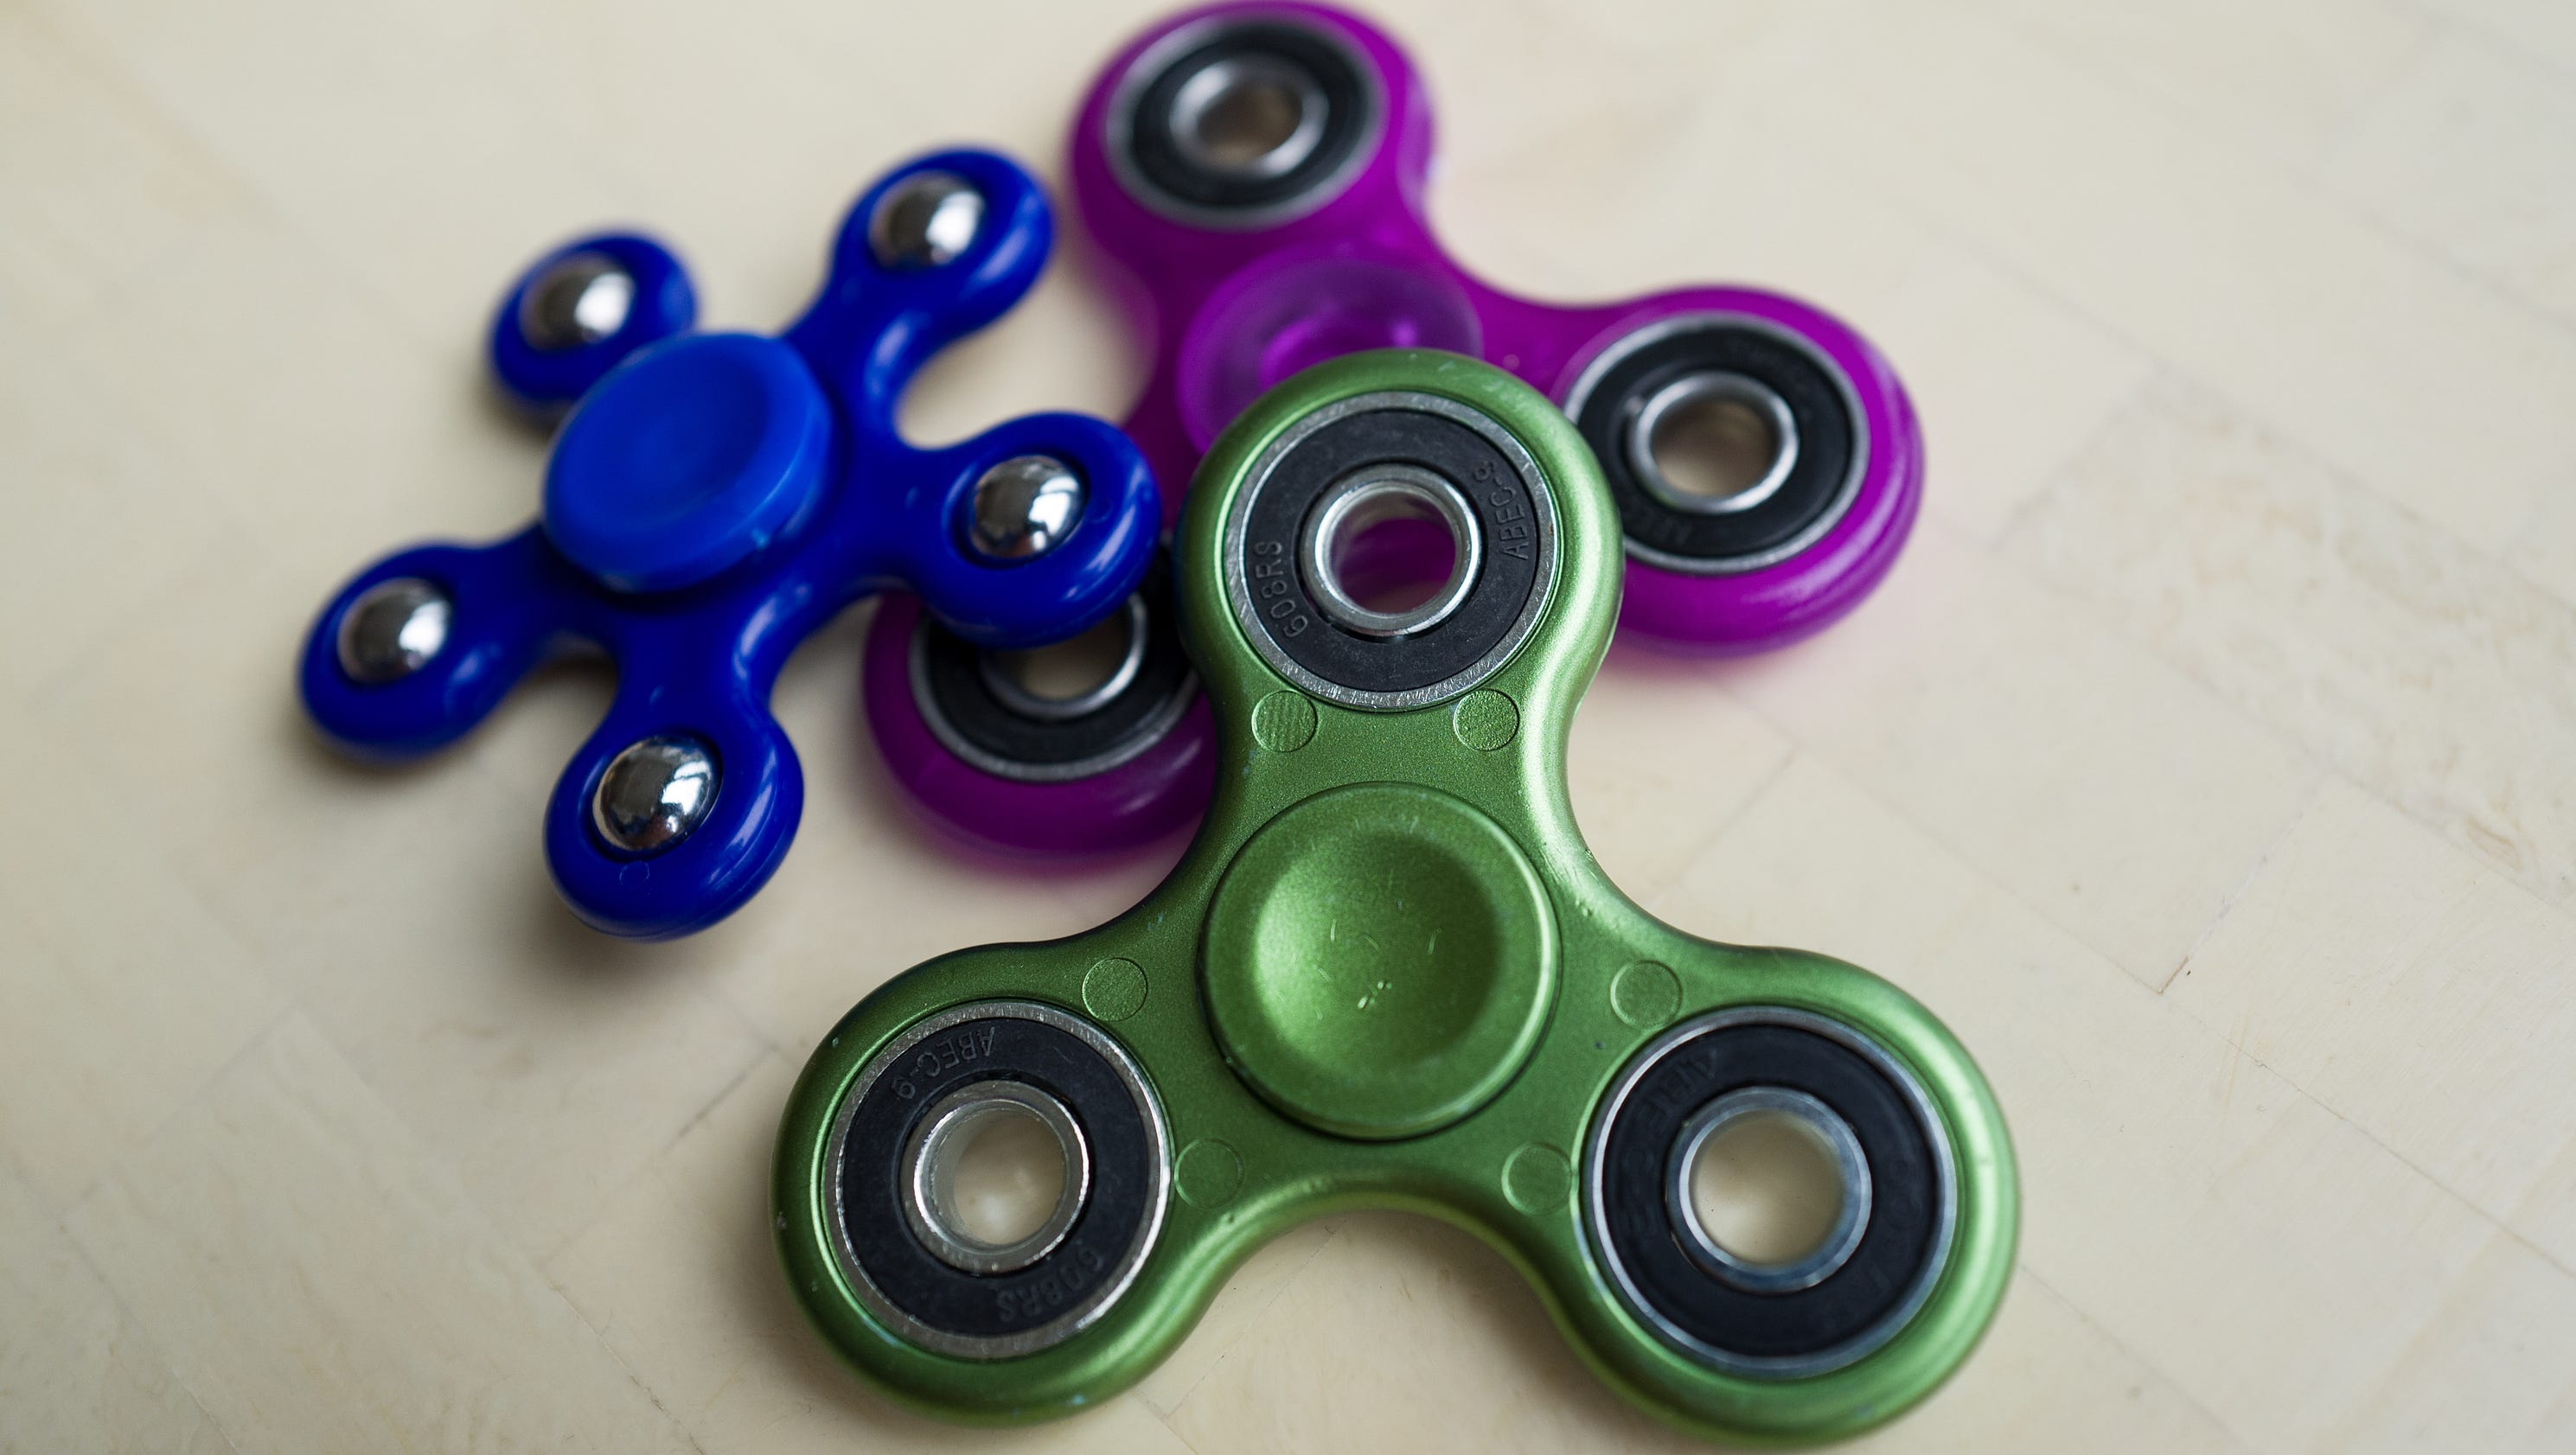 Fidget spinners: Here's how they became so darn popular